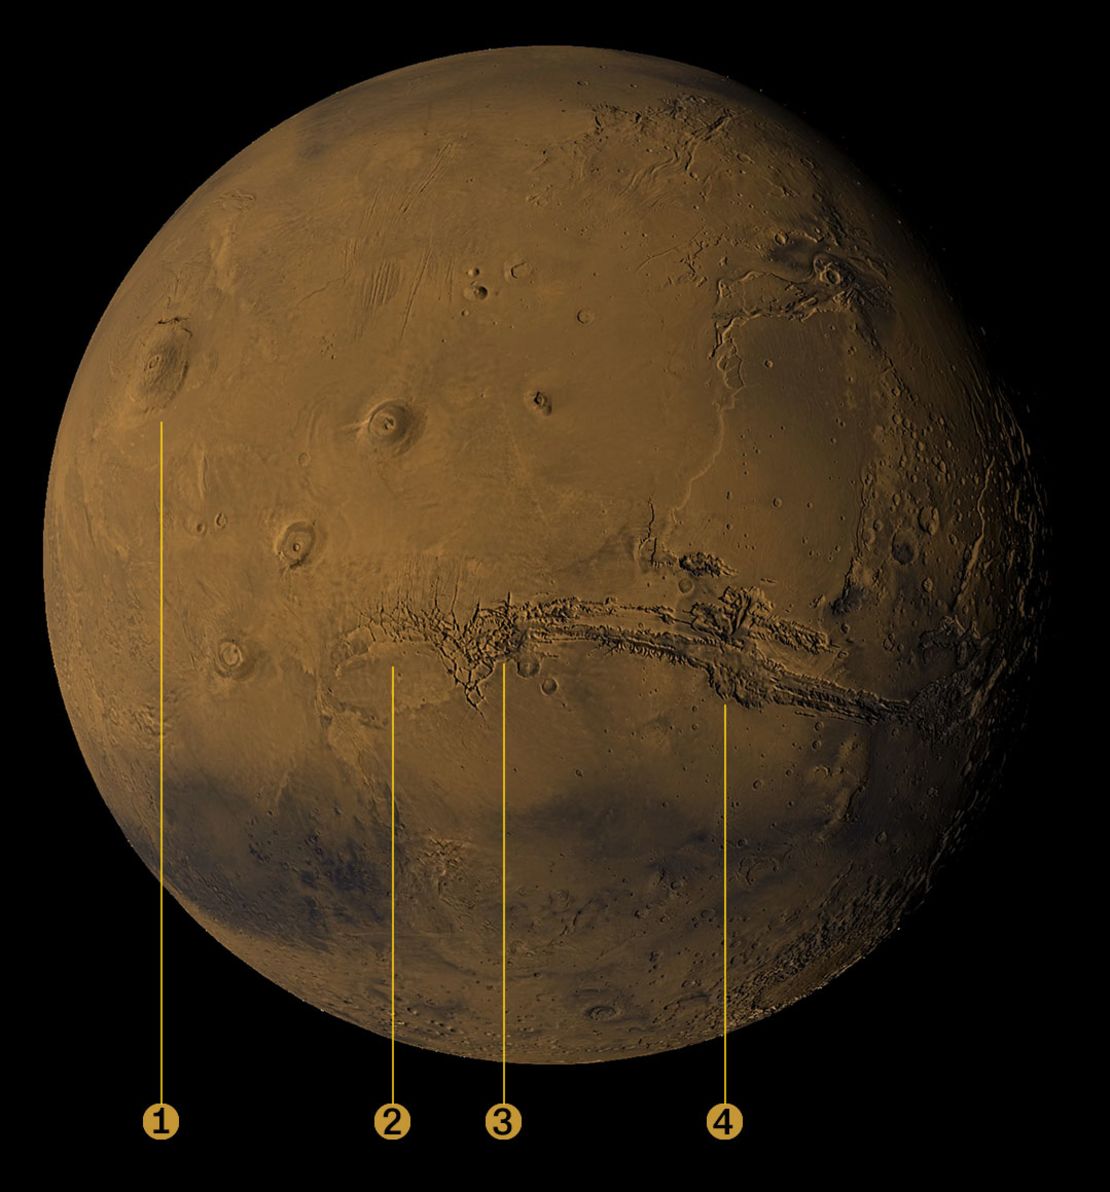 Some of the largest volcanoes on Mars lie relatively close to the proposed “Noctis volcano.” Shown here: <strong>1)</strong> Olympus Mons, the tallest known volcano in our solar system. <strong>2)</strong> The Tharsis plateau, which is home to three massive volcanoes. <strong>3)</strong> Noctis Labyrinthus <strong>4)</strong> Valles Marineris, a neighboring region of canyons